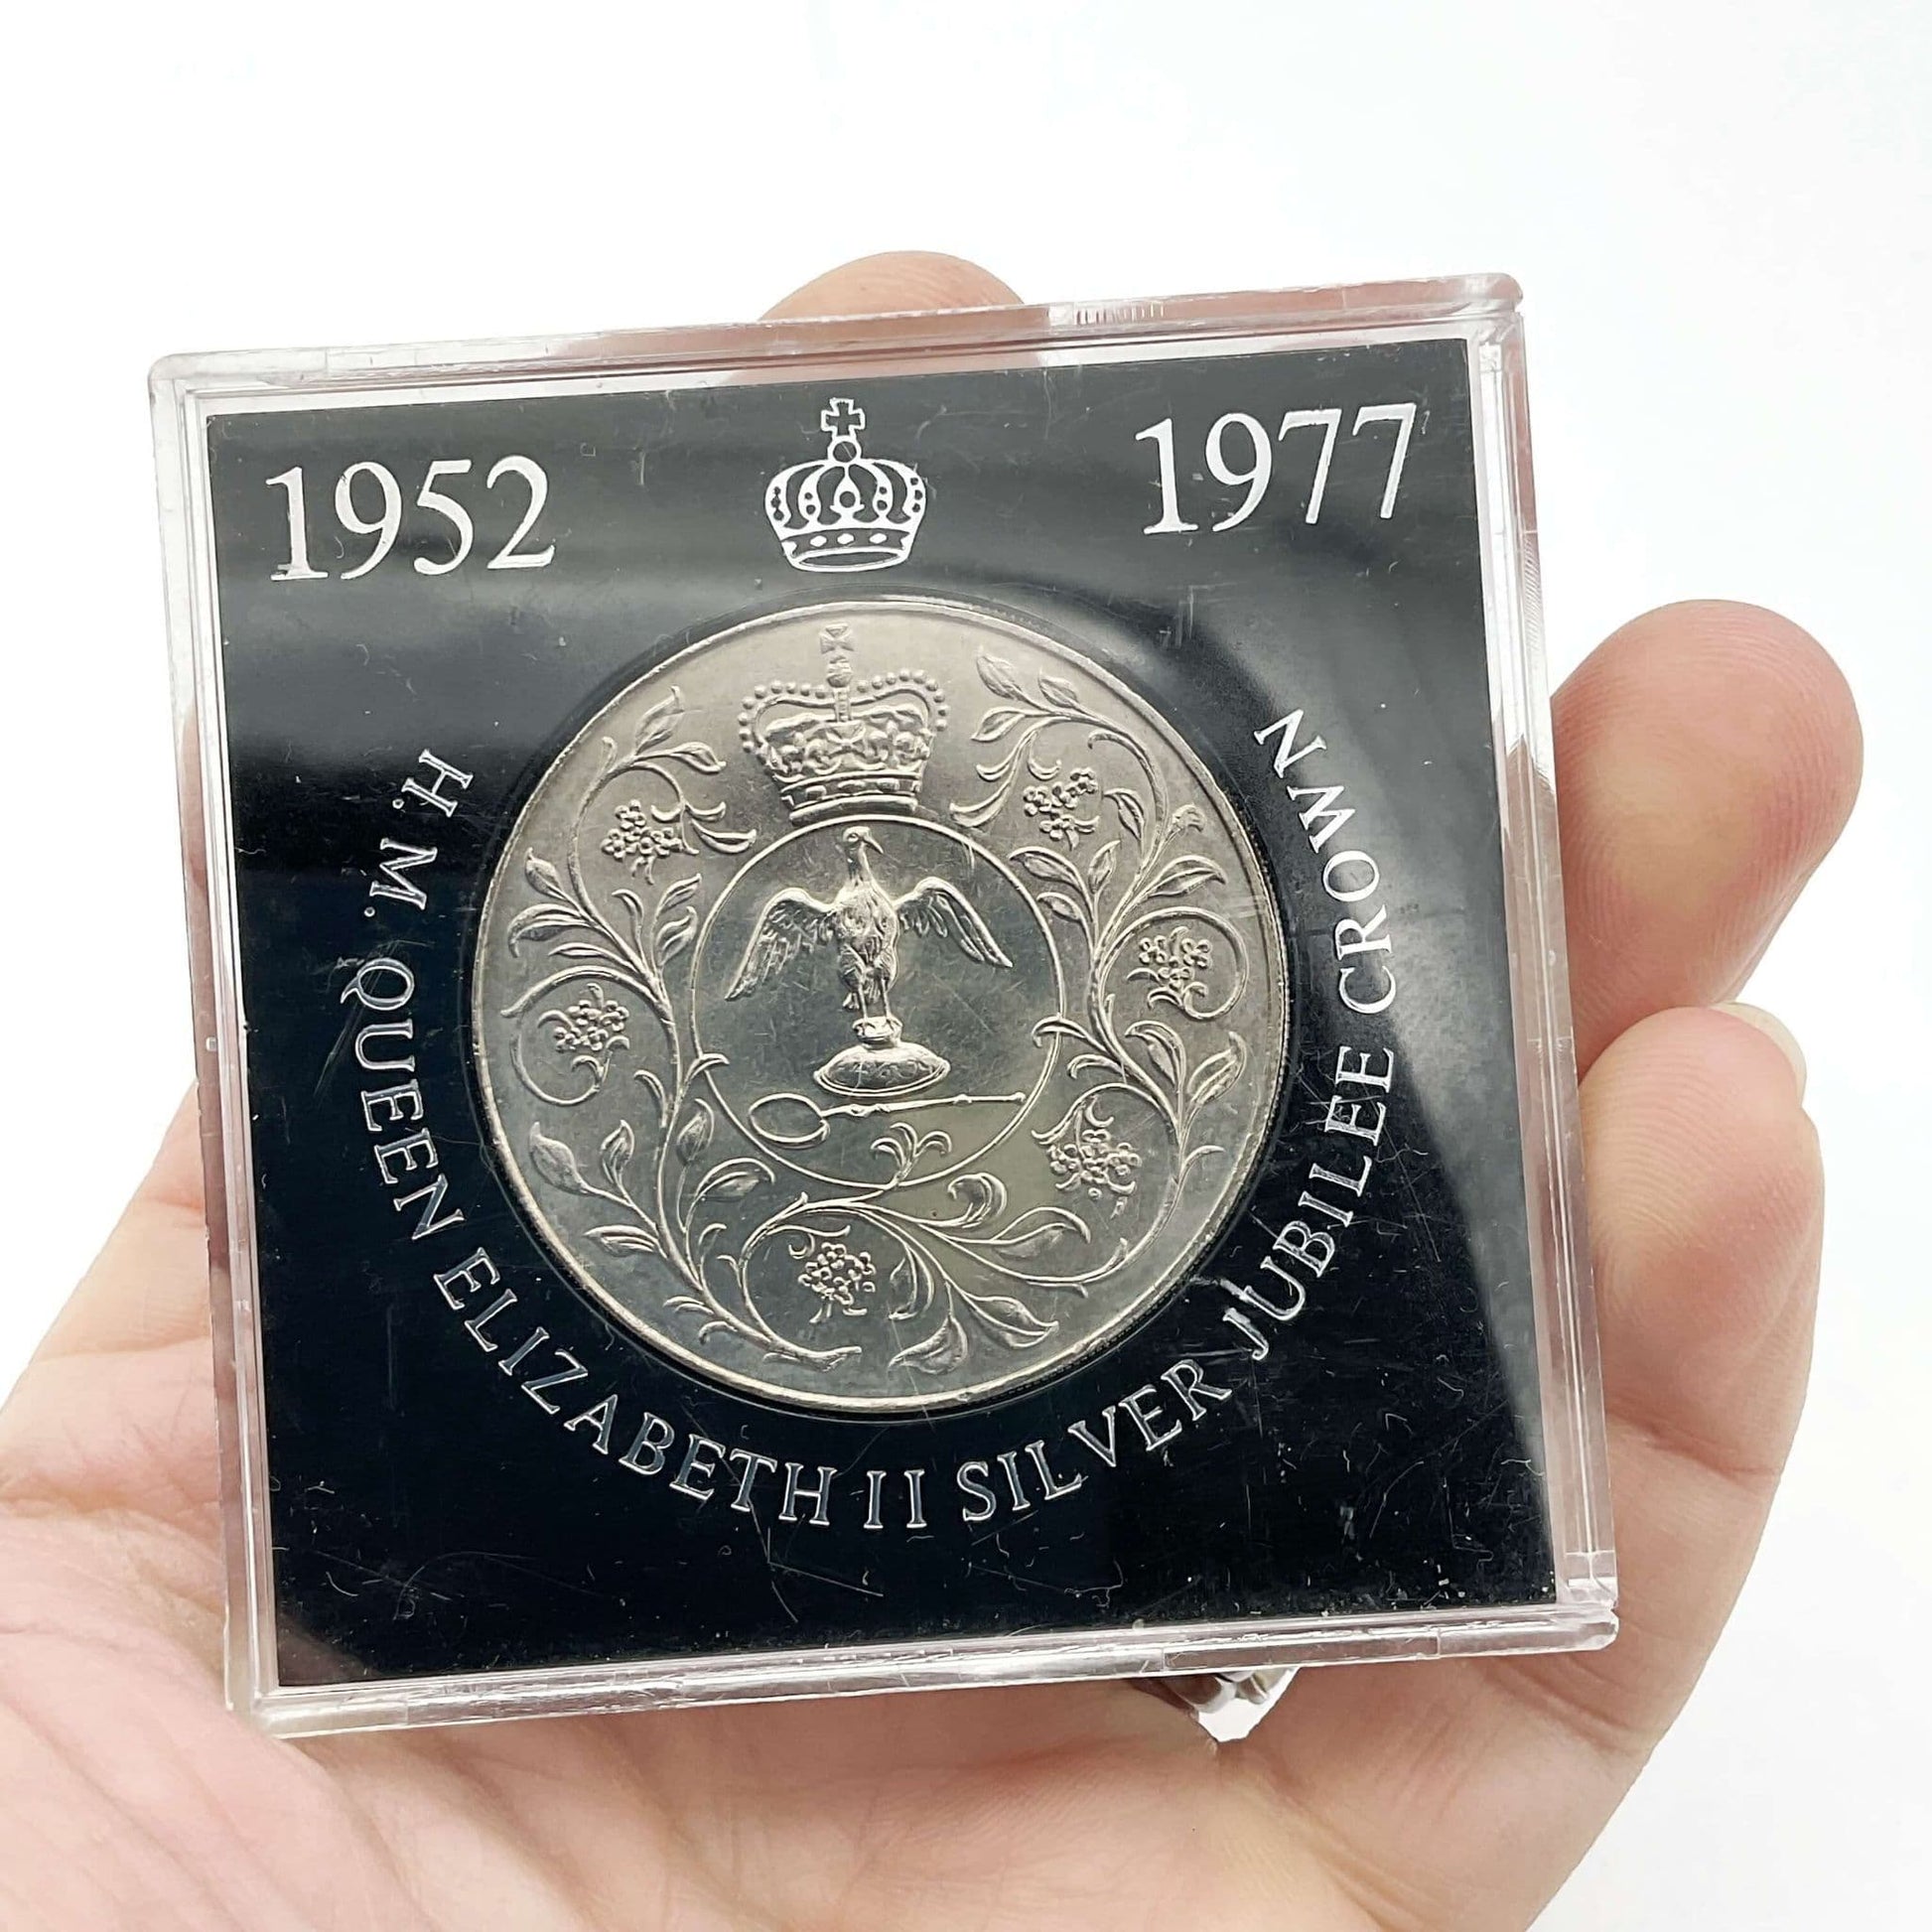 silver crown coin in a black case with HM Queen Elizabeth II Jubliee Crown held in a hand